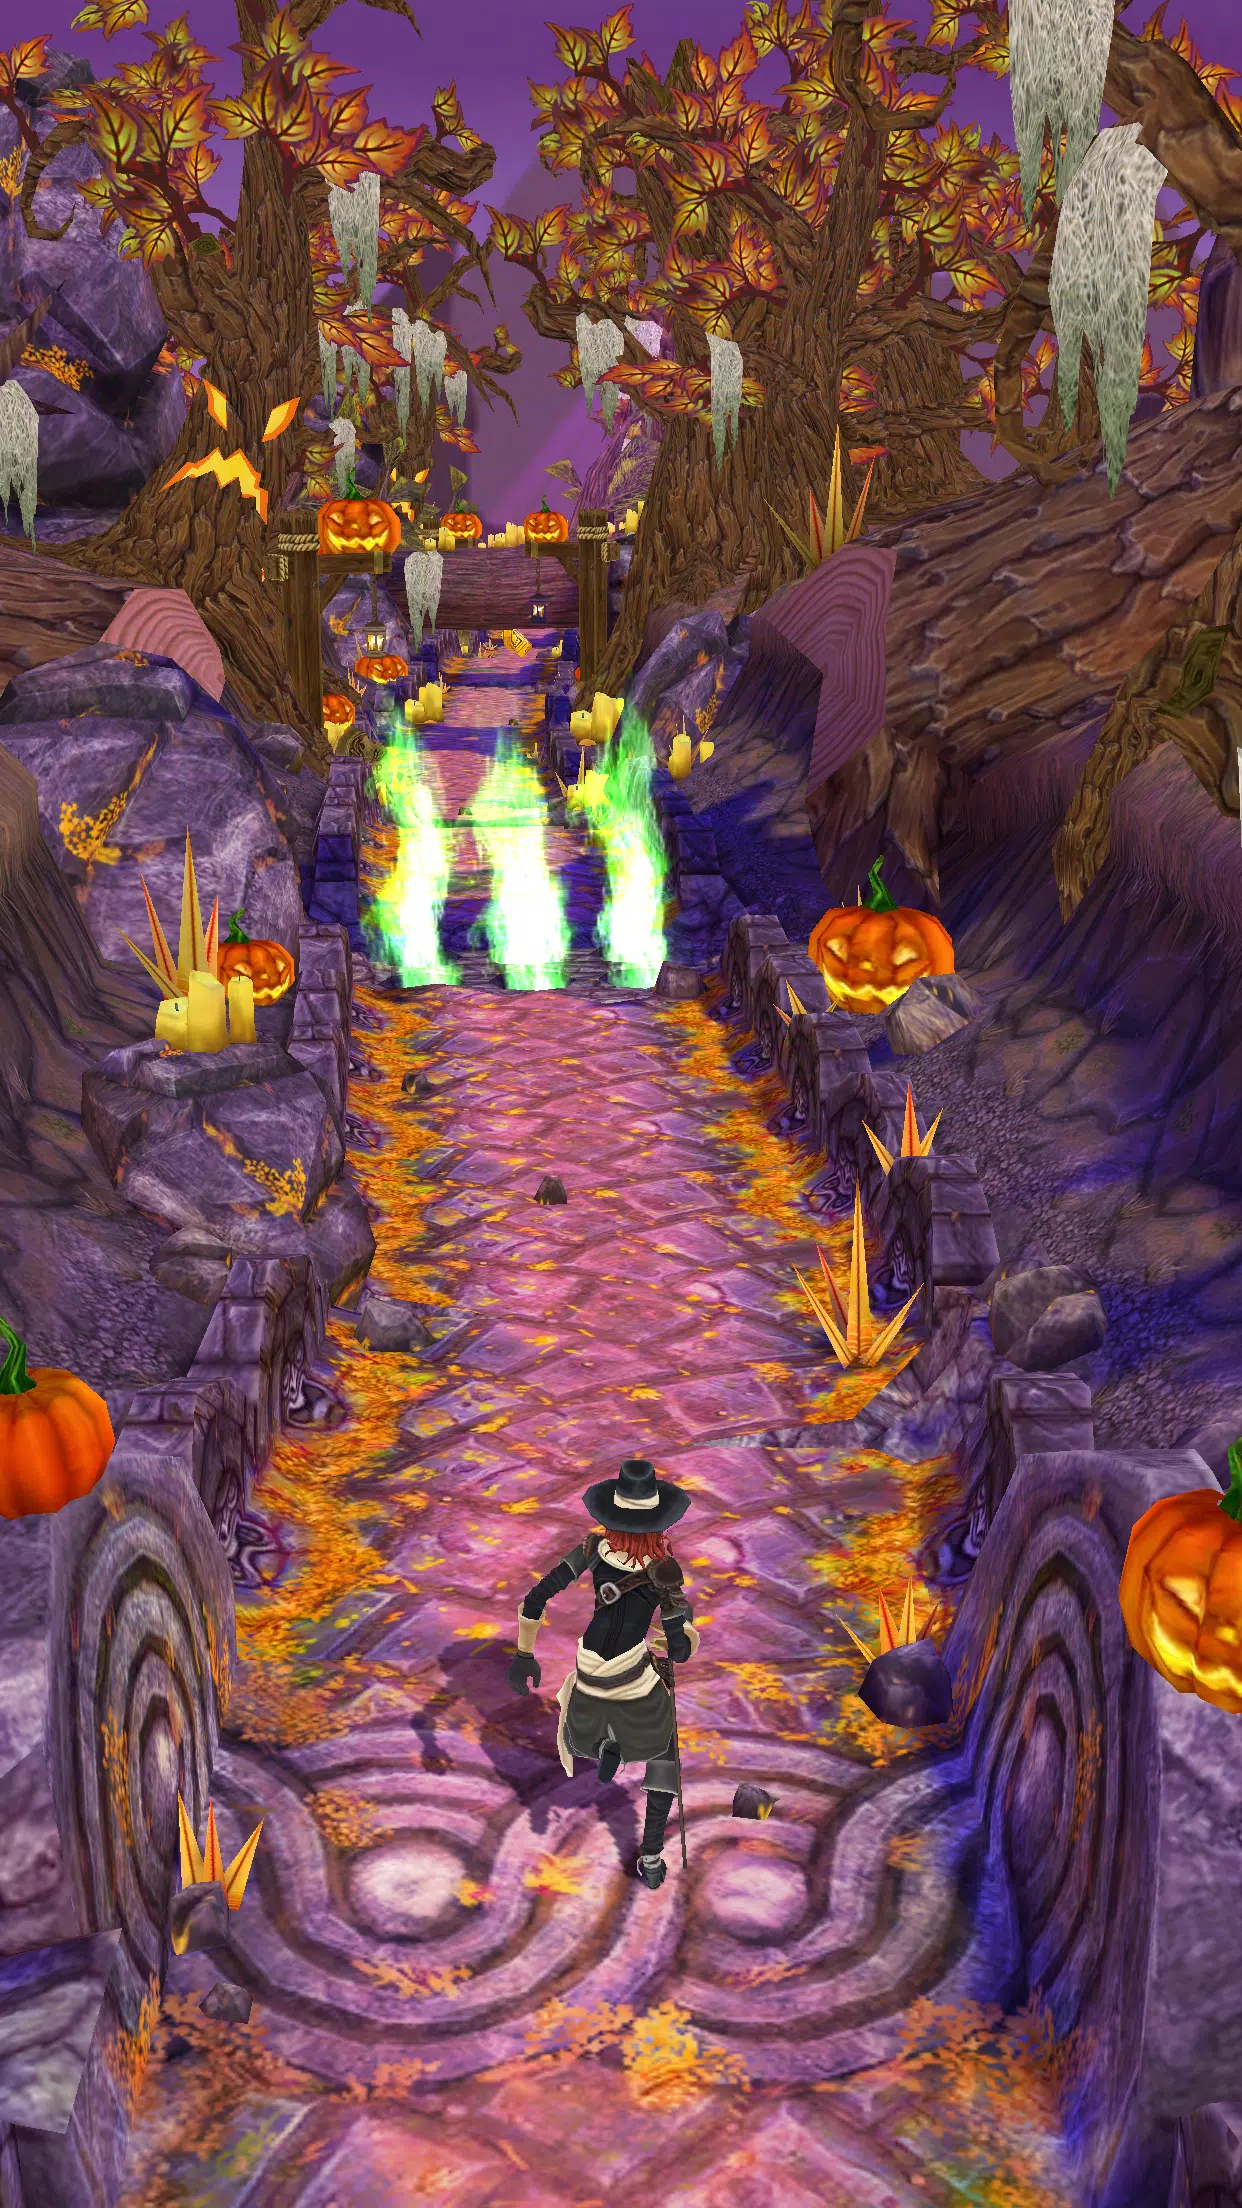 Download Temple Run 2 1.105.1 for Android 